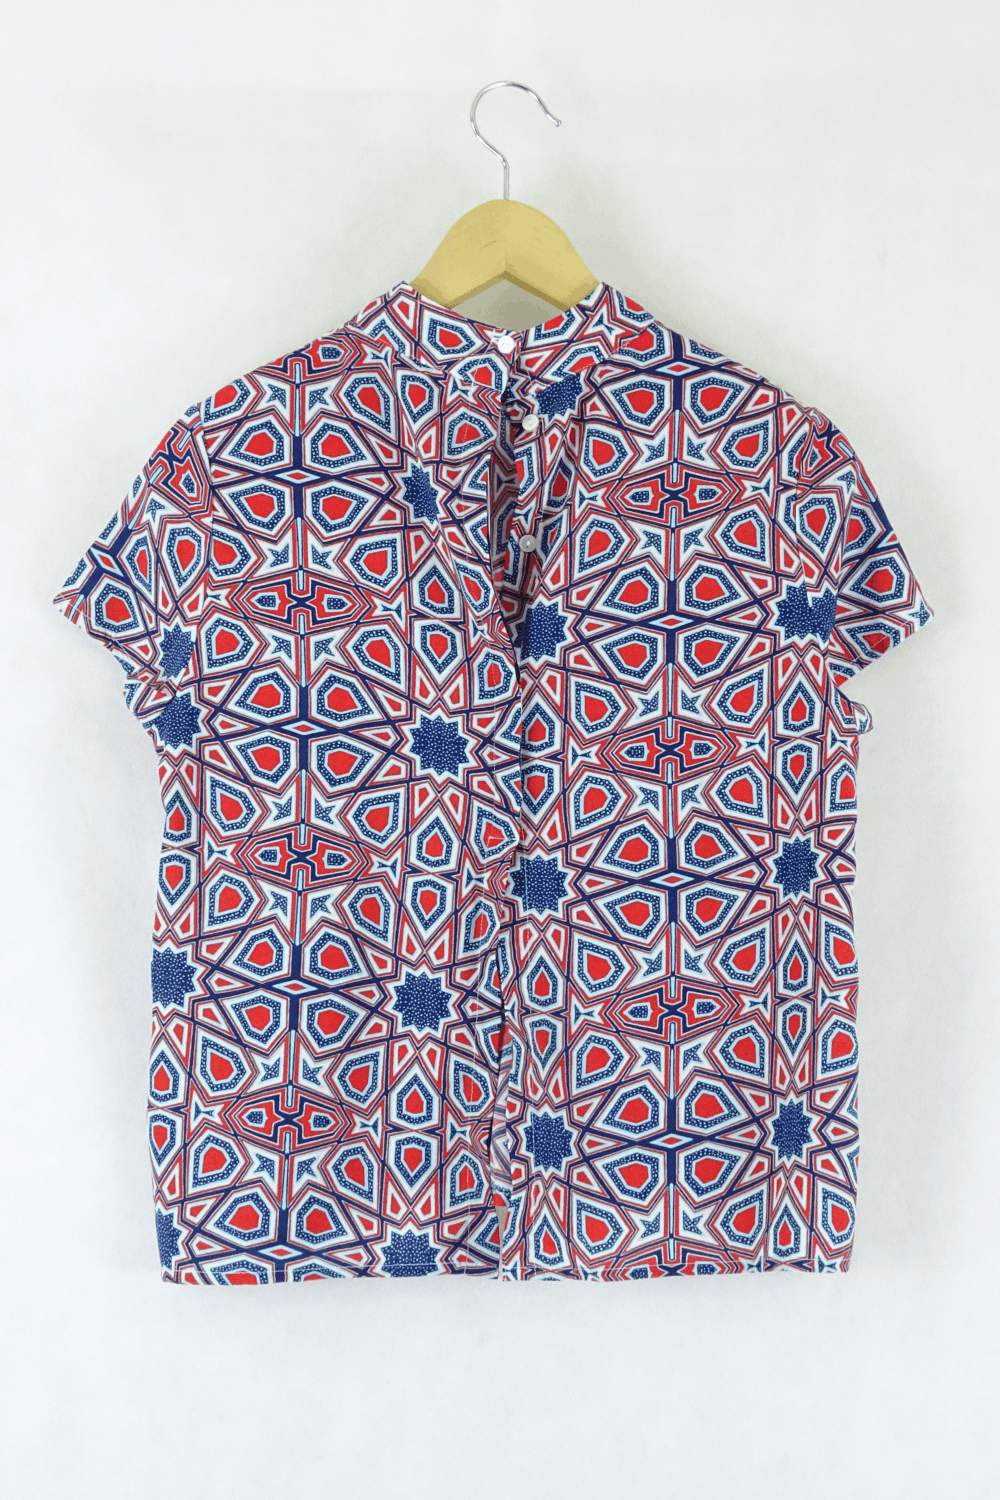 Monk Patterned Red And Blue Top S